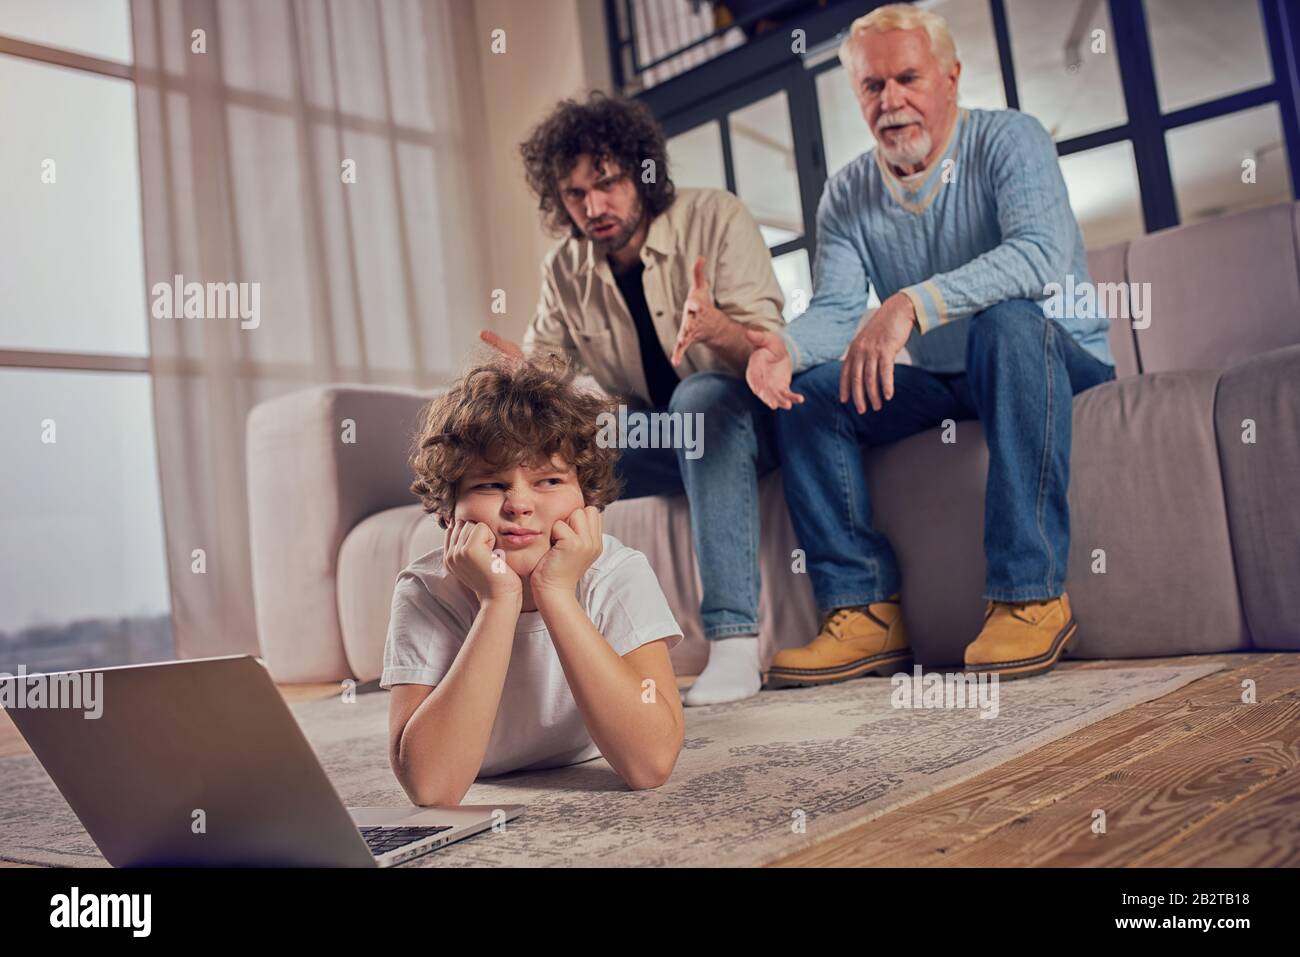 Father get angry and scold his son because he is internet addicted Stock Photo